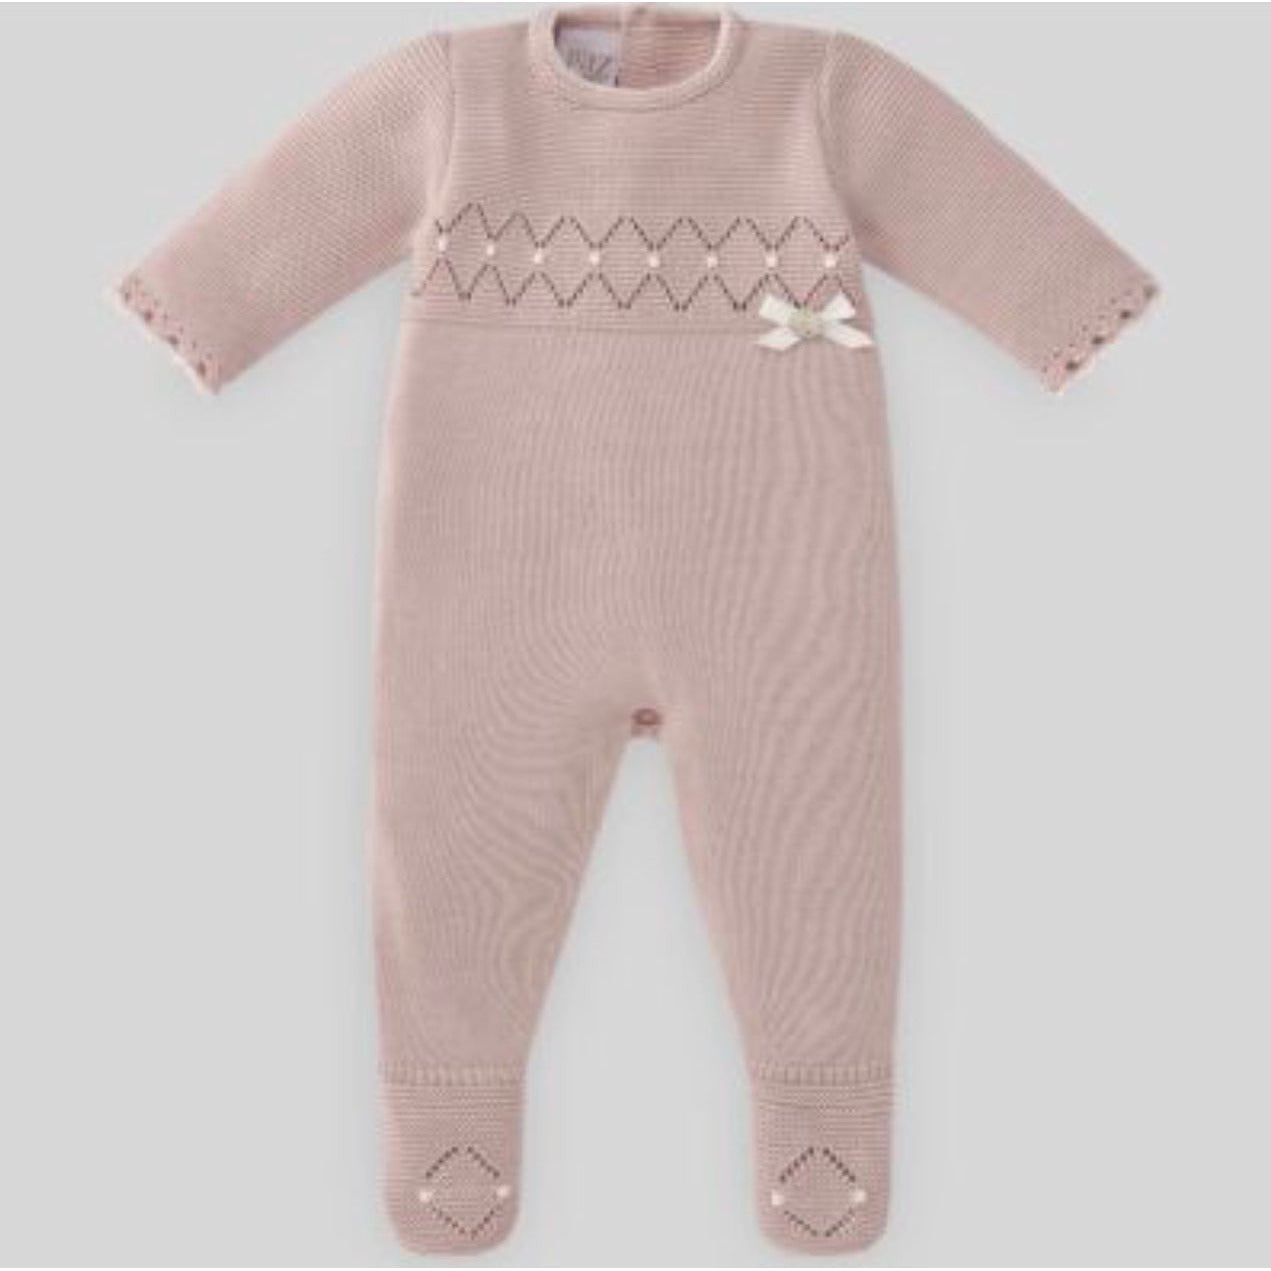 PROMESA KNIT OVERALL WITH KNIT BONNET